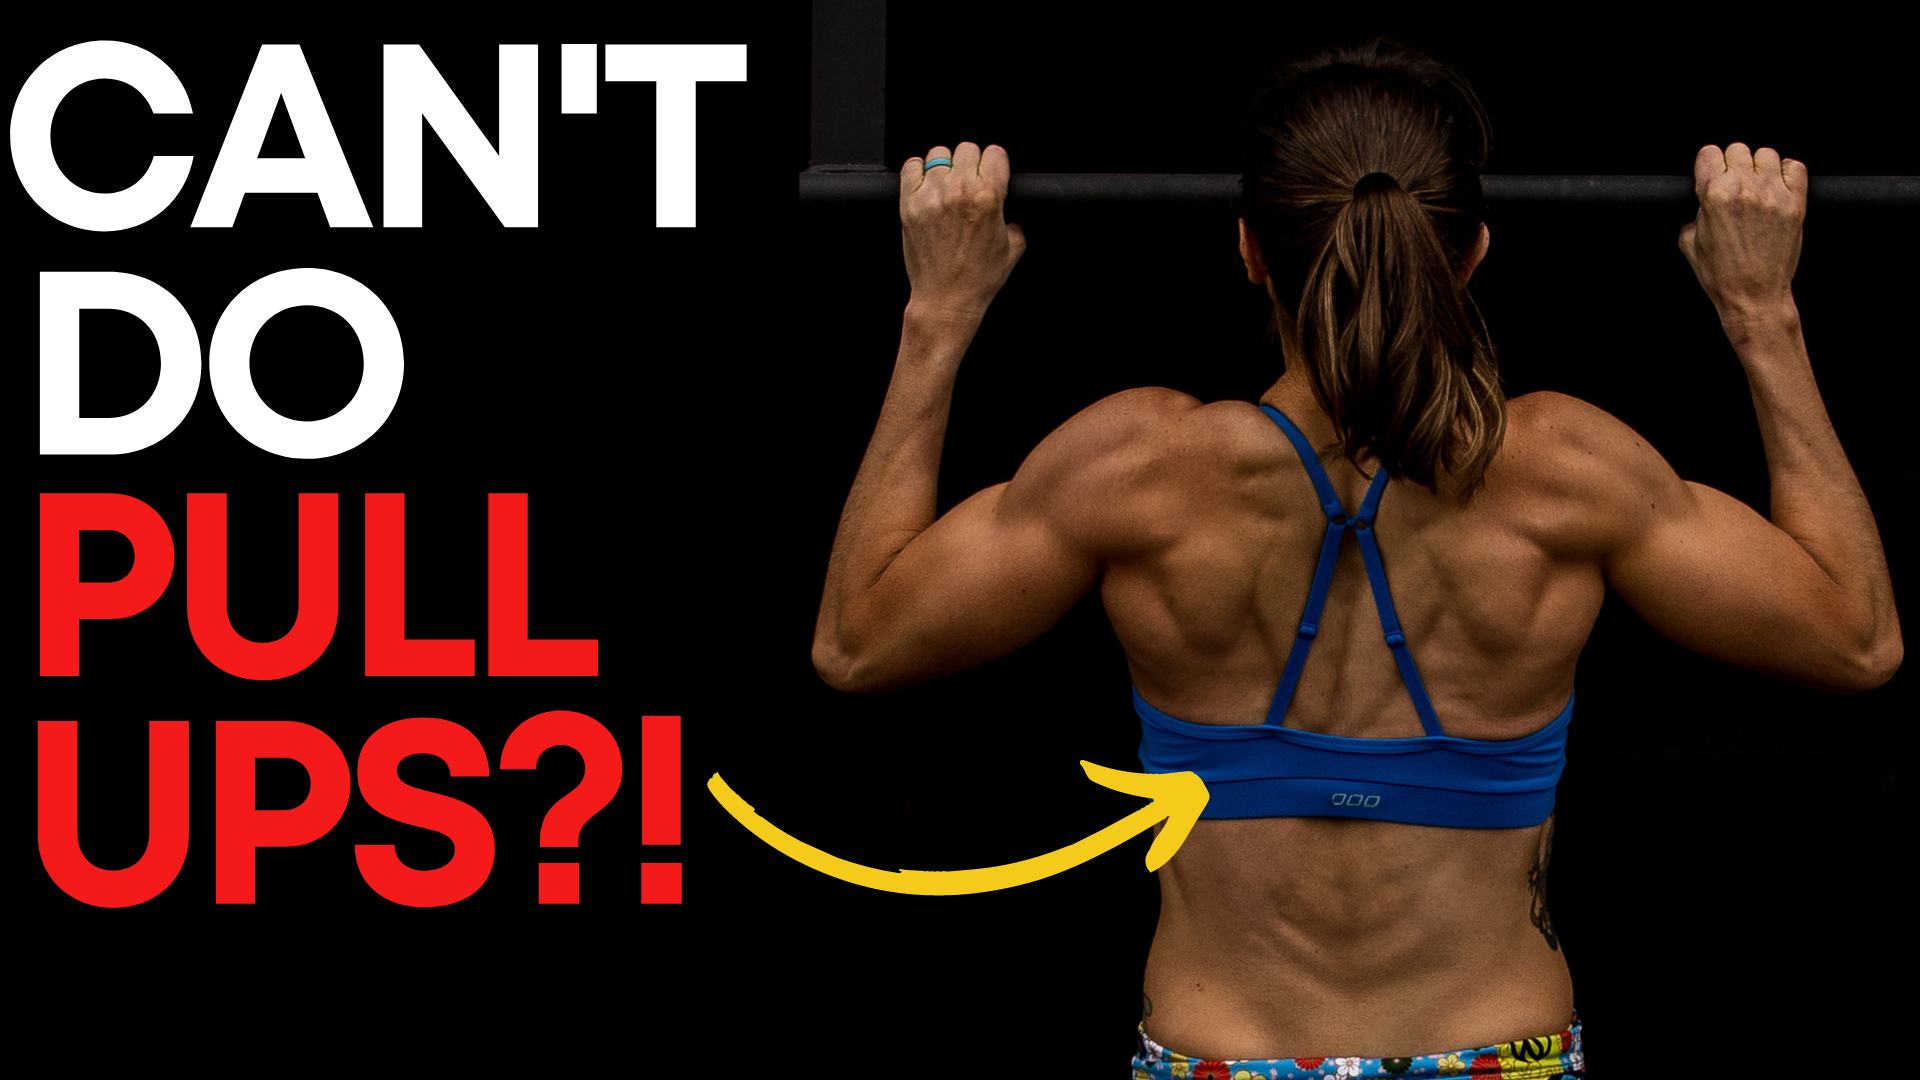 Can’t Do Pull Ups? Just Do This!